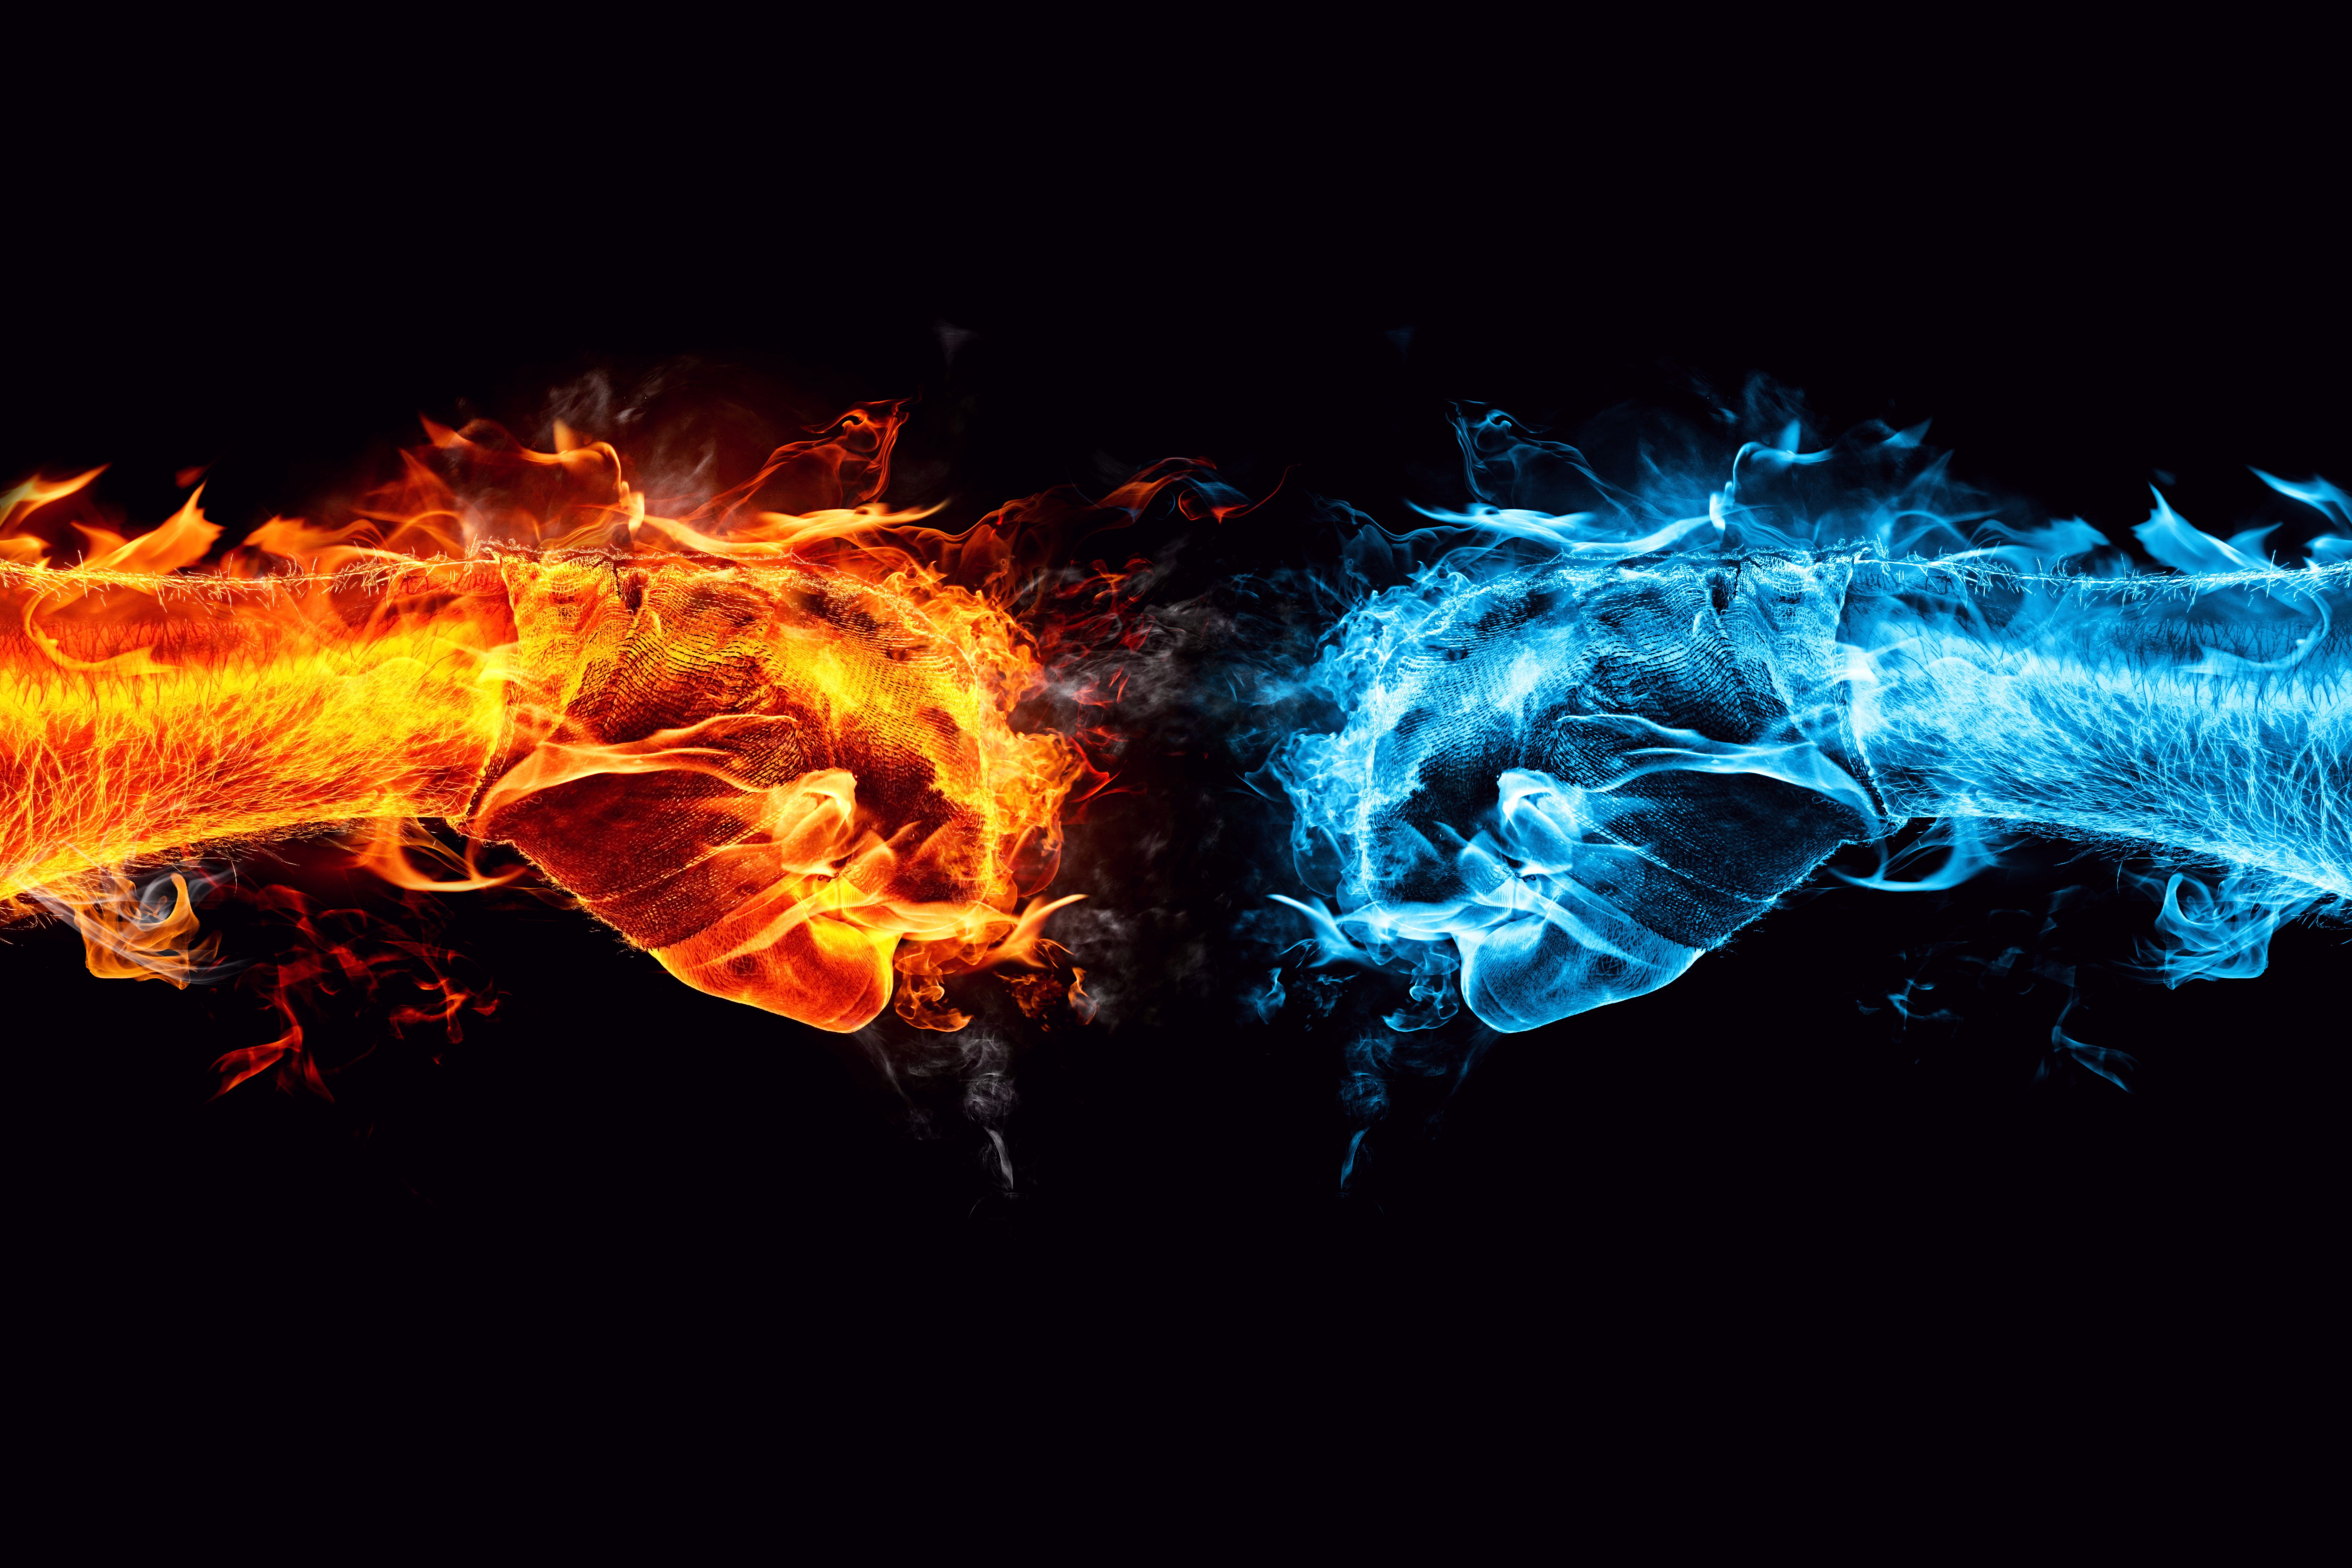 Details 64+ fire and ice wallpaper latest - in.cdgdbentre